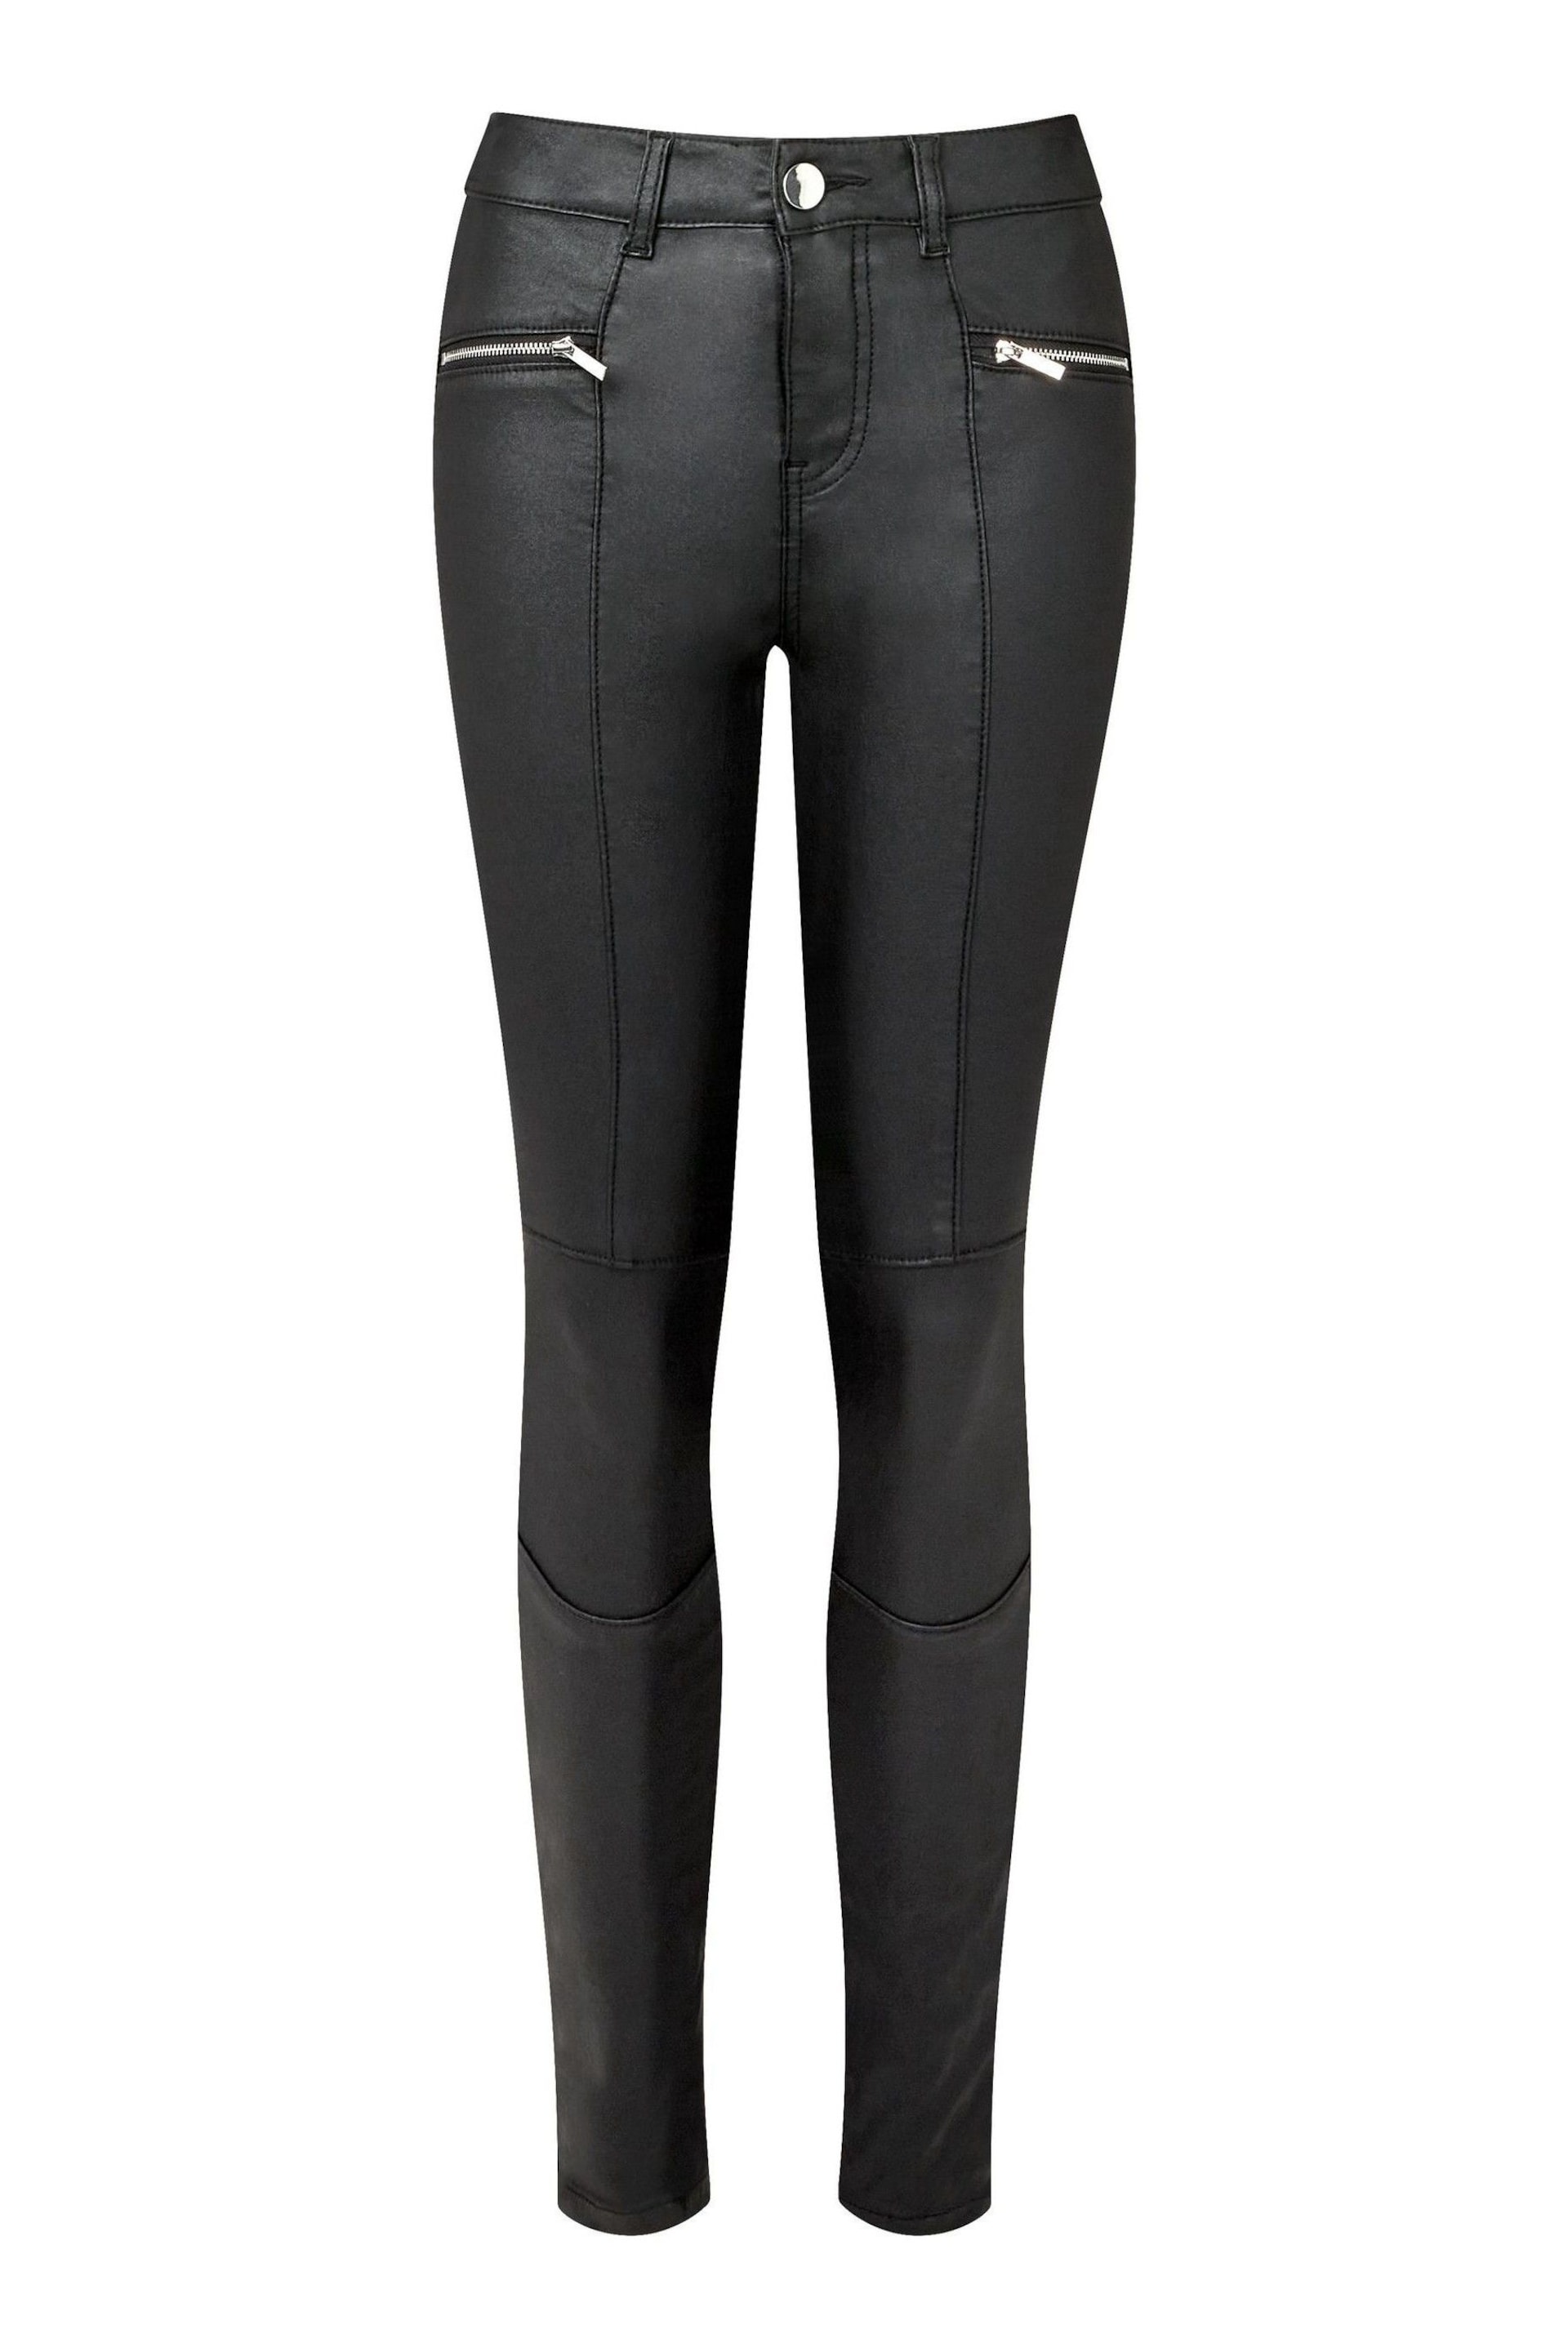 Joe Browns Black Essentials Zip Detail Faux Leather Trousers - Image 4 of 4